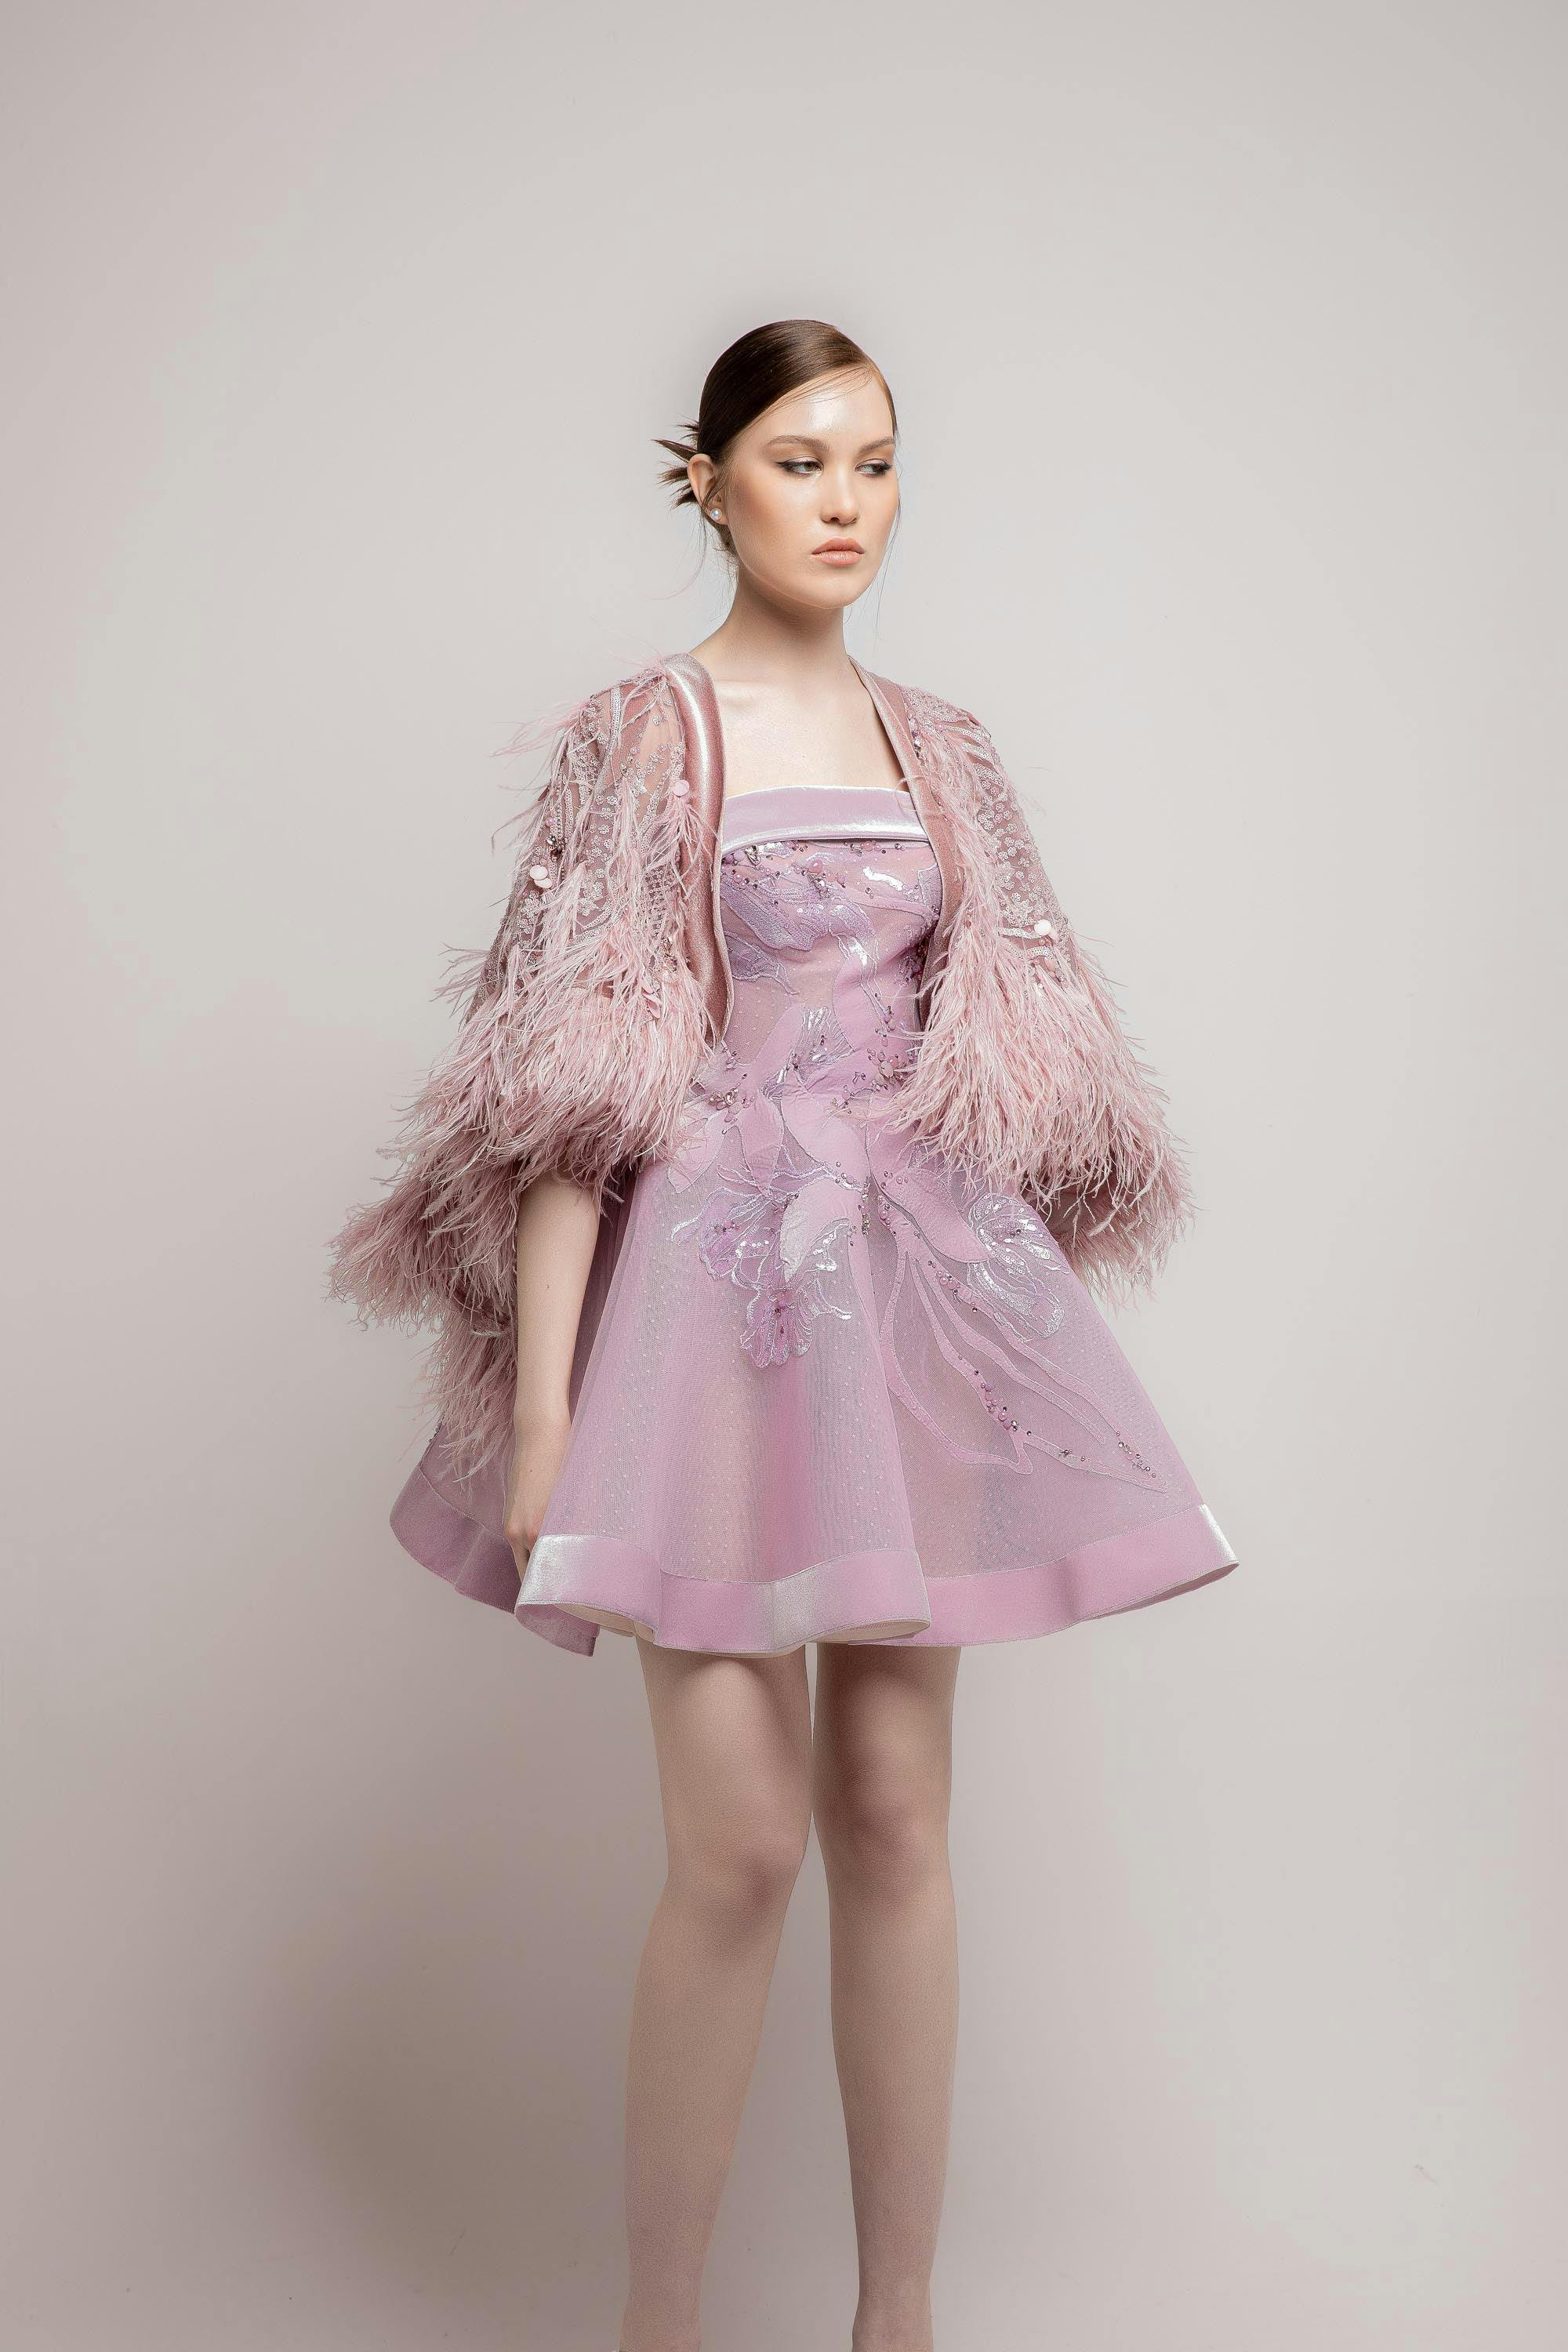 Look 23 A - Jean fares couture - JFC-classy Pink feathers jacket